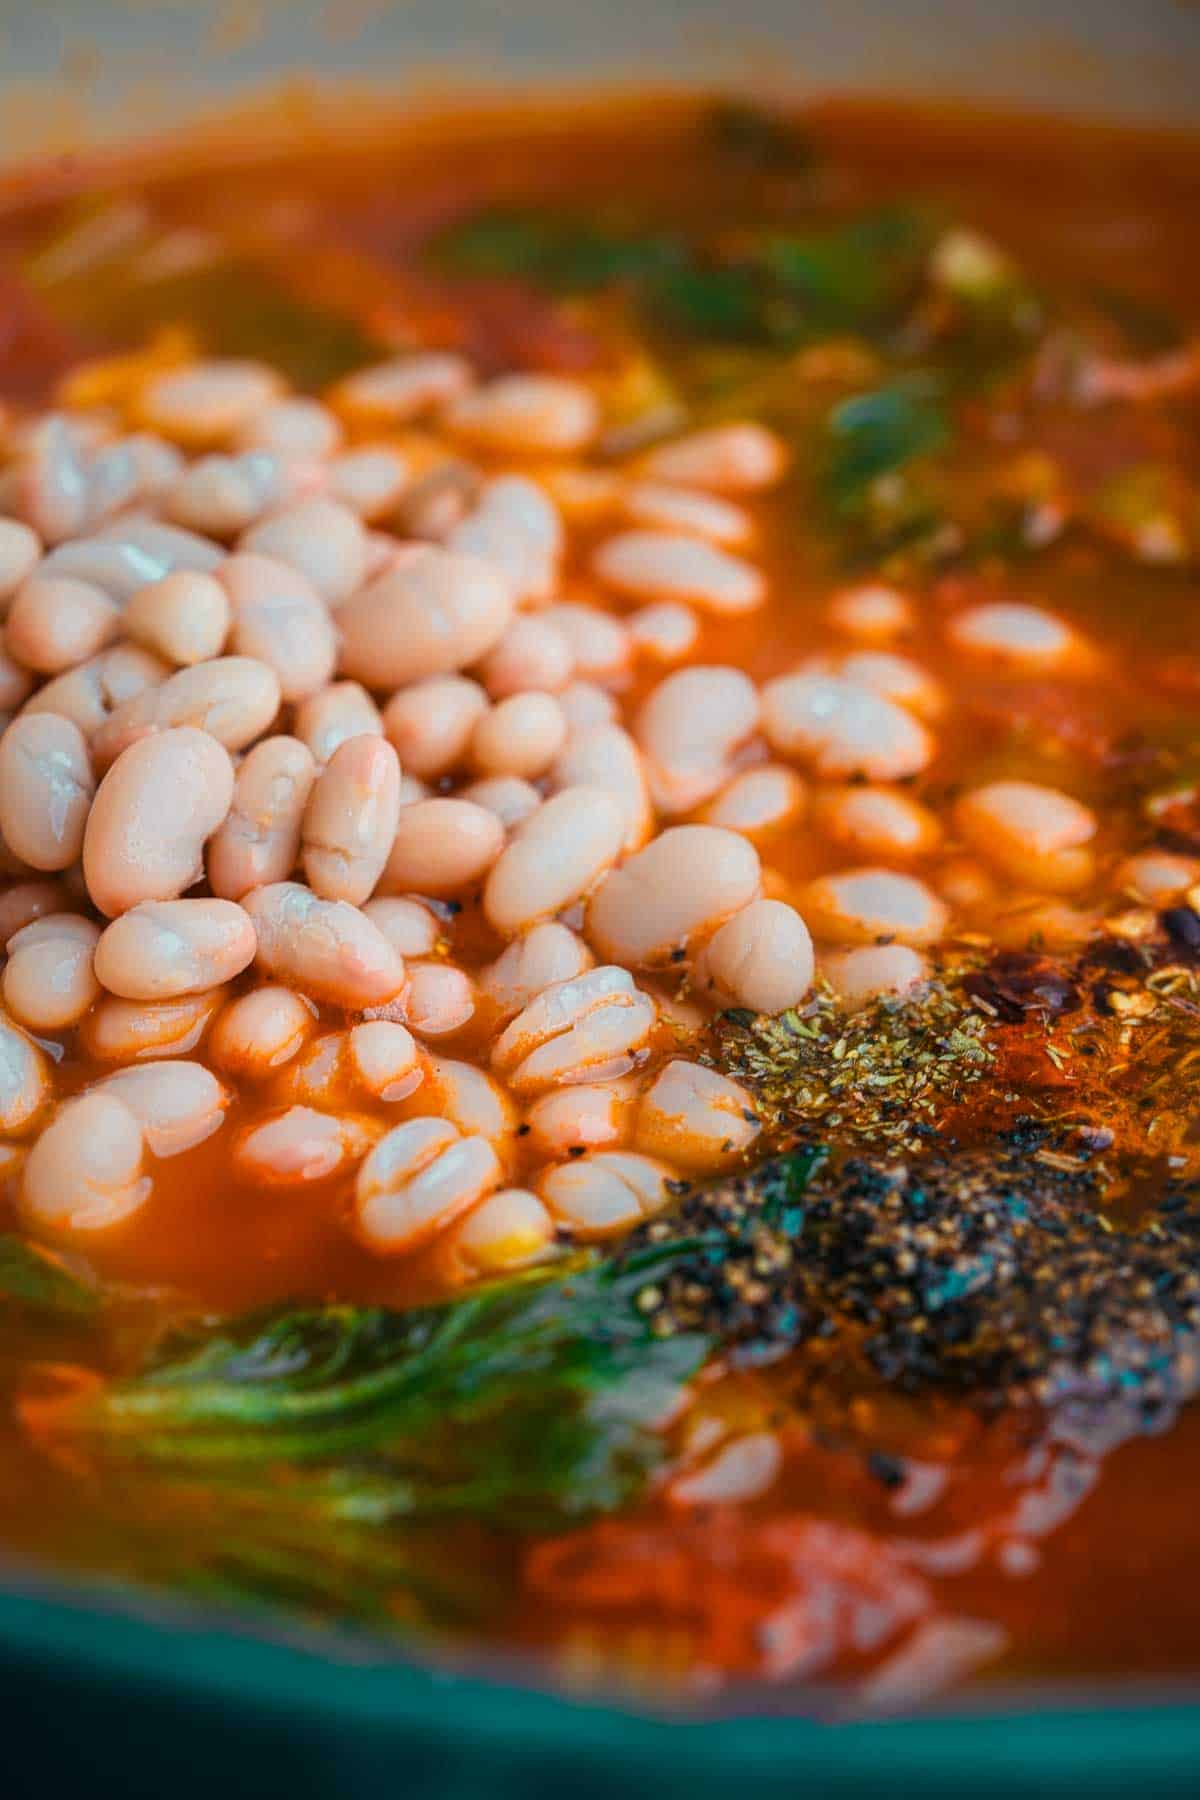 White beans and seasonings are added to a pot of soup.